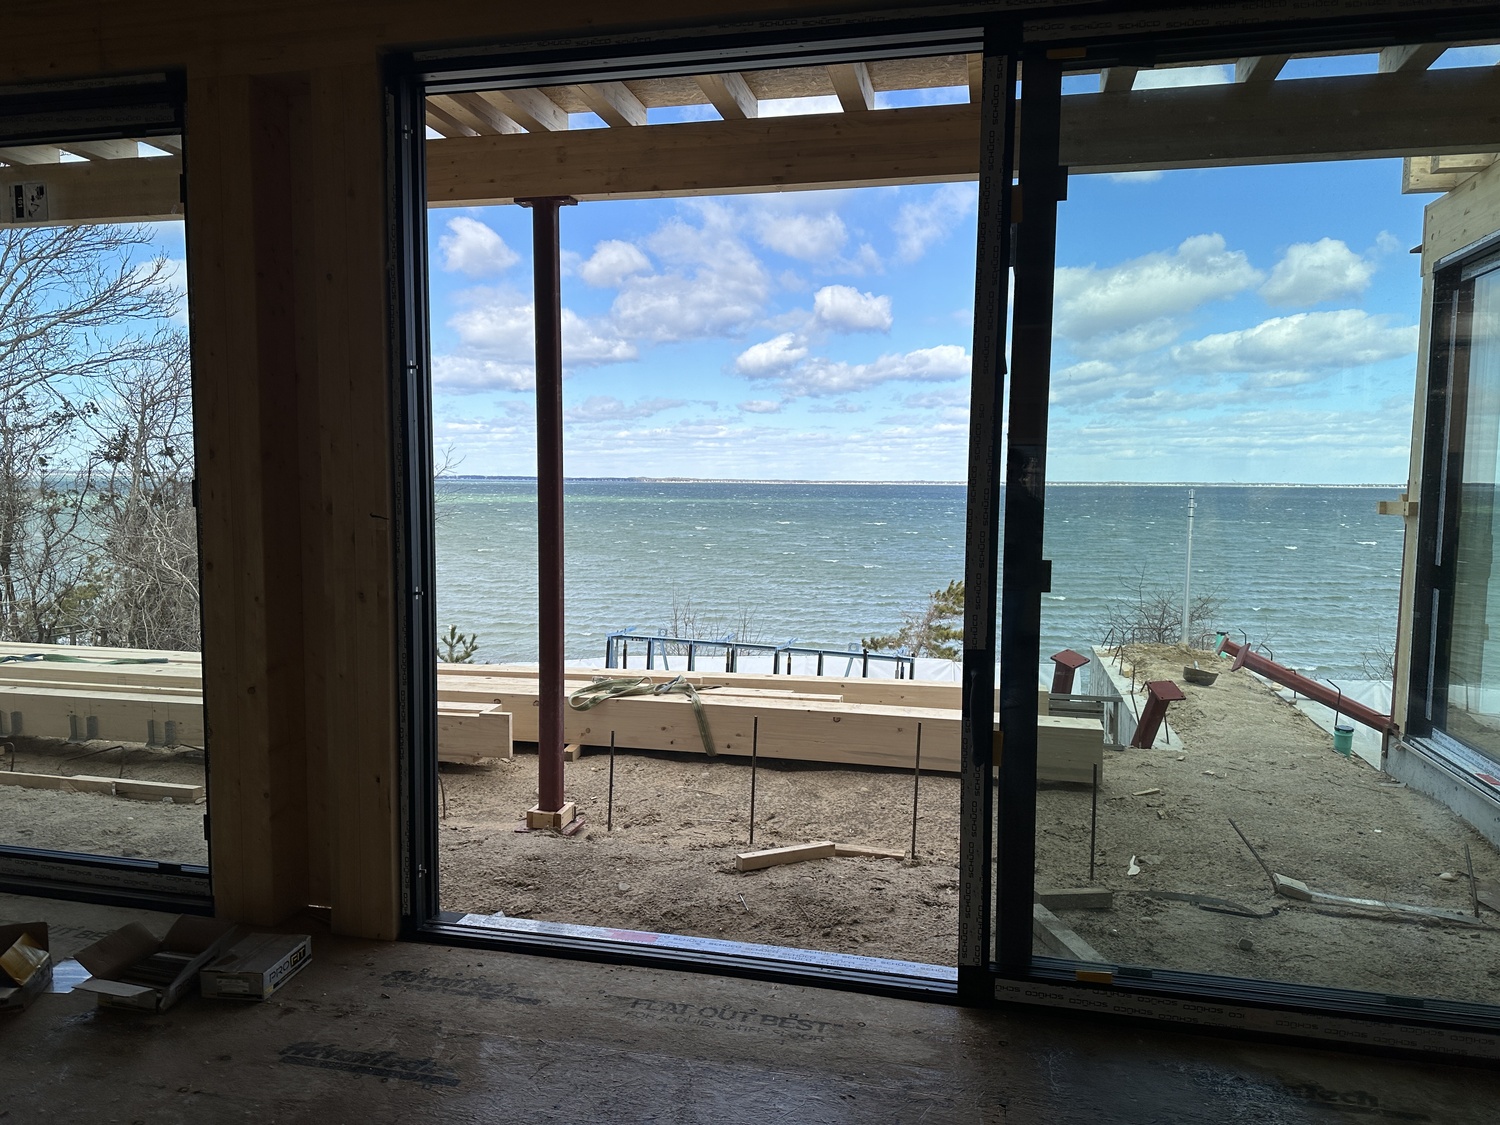 The view from inside the Hampton Bays home. BRENDAN J. O'REILLY